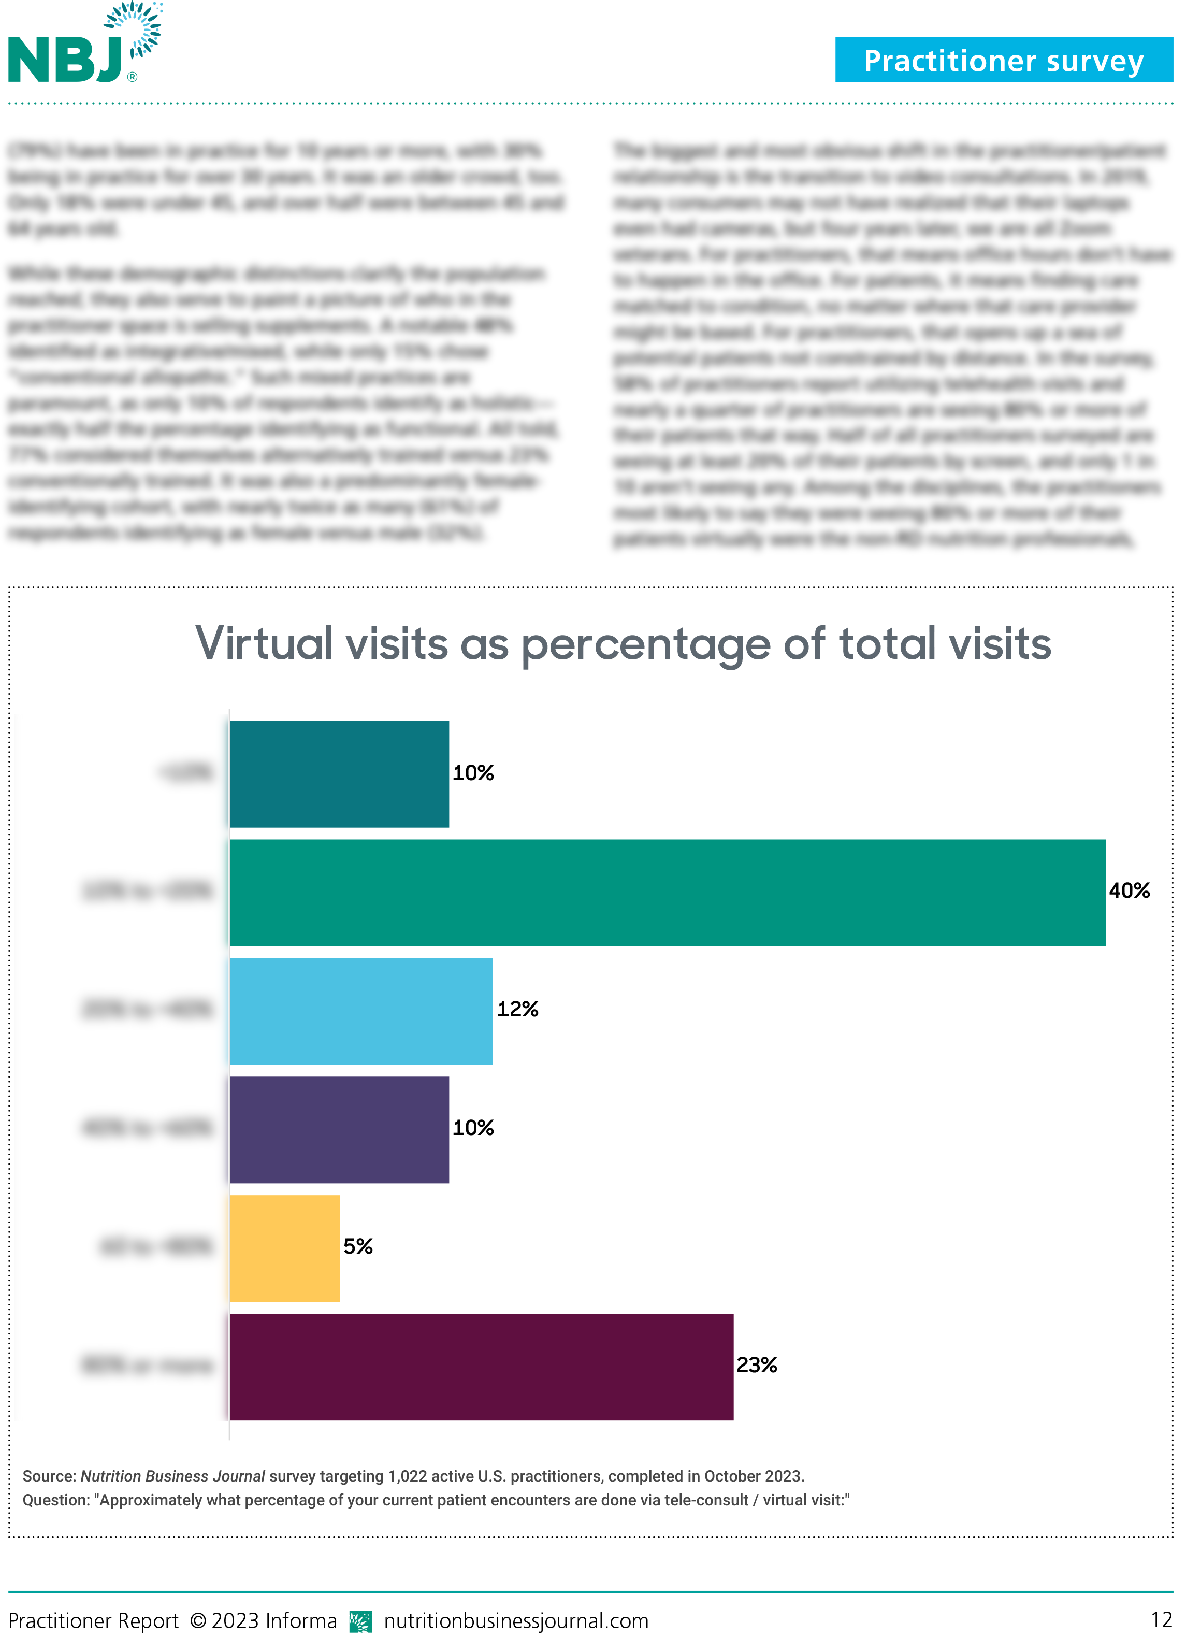 Virtual visits as a percentage of total visits